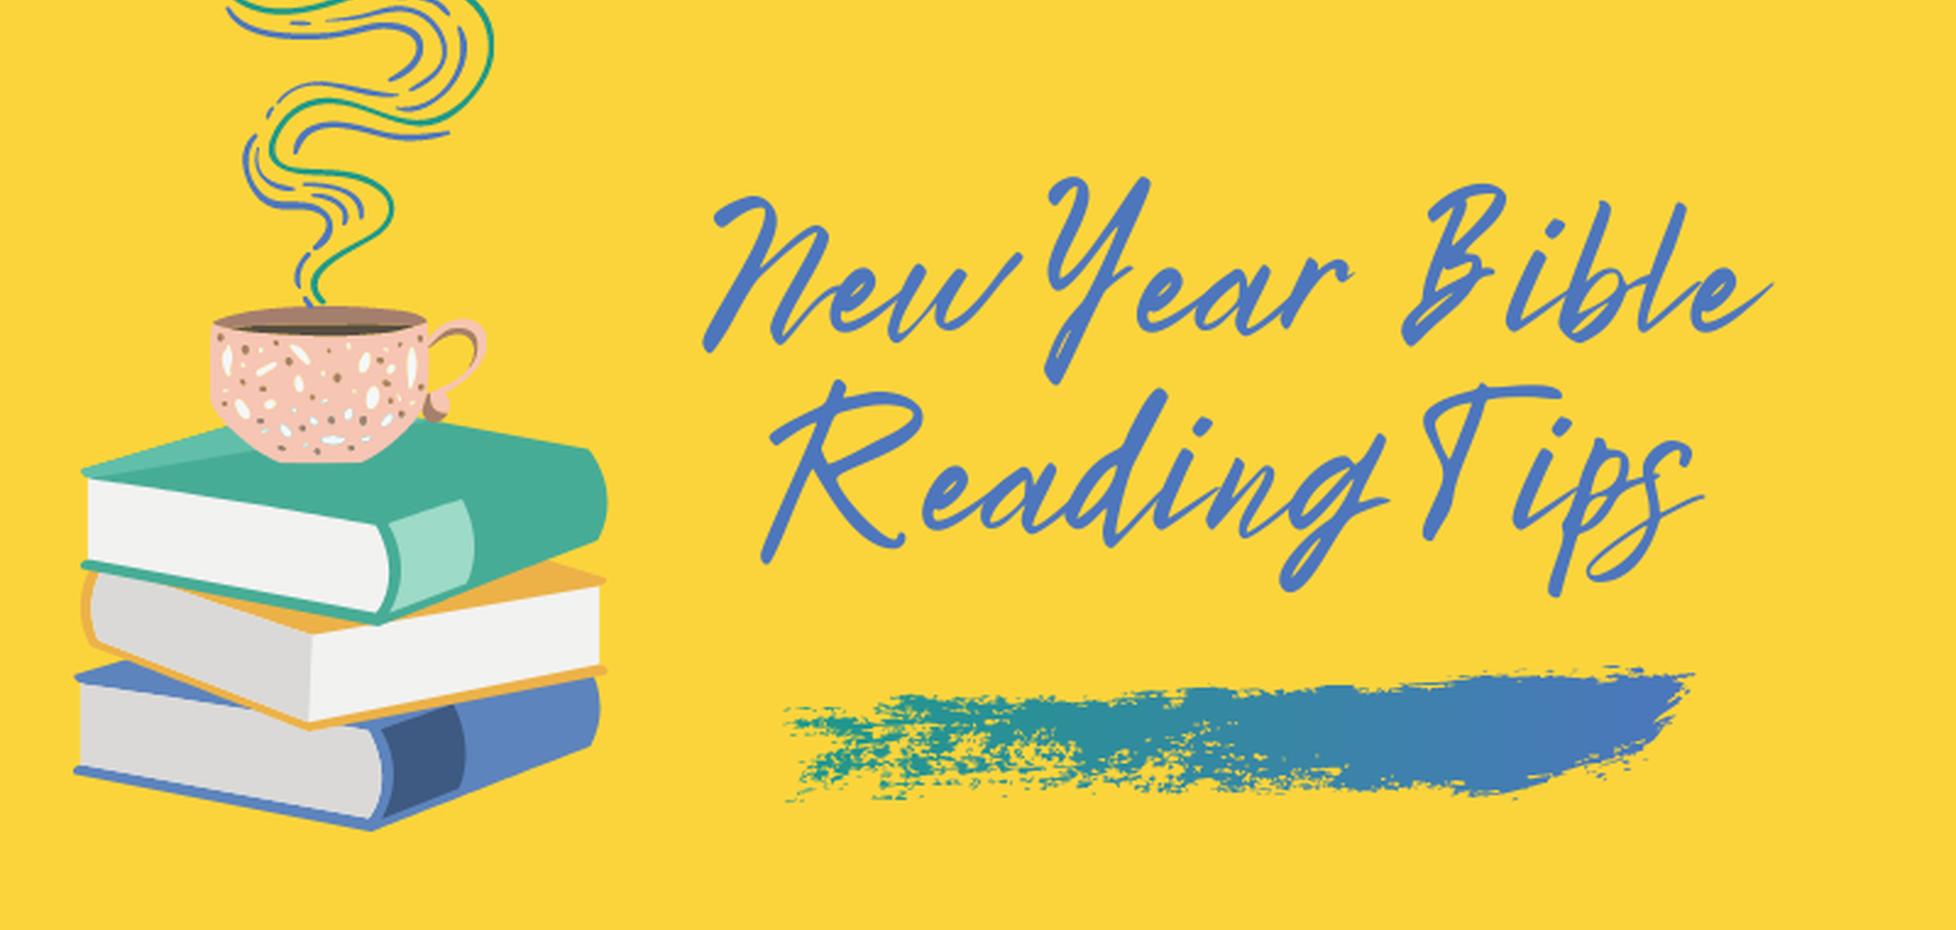 New Year Bible Reading Tips